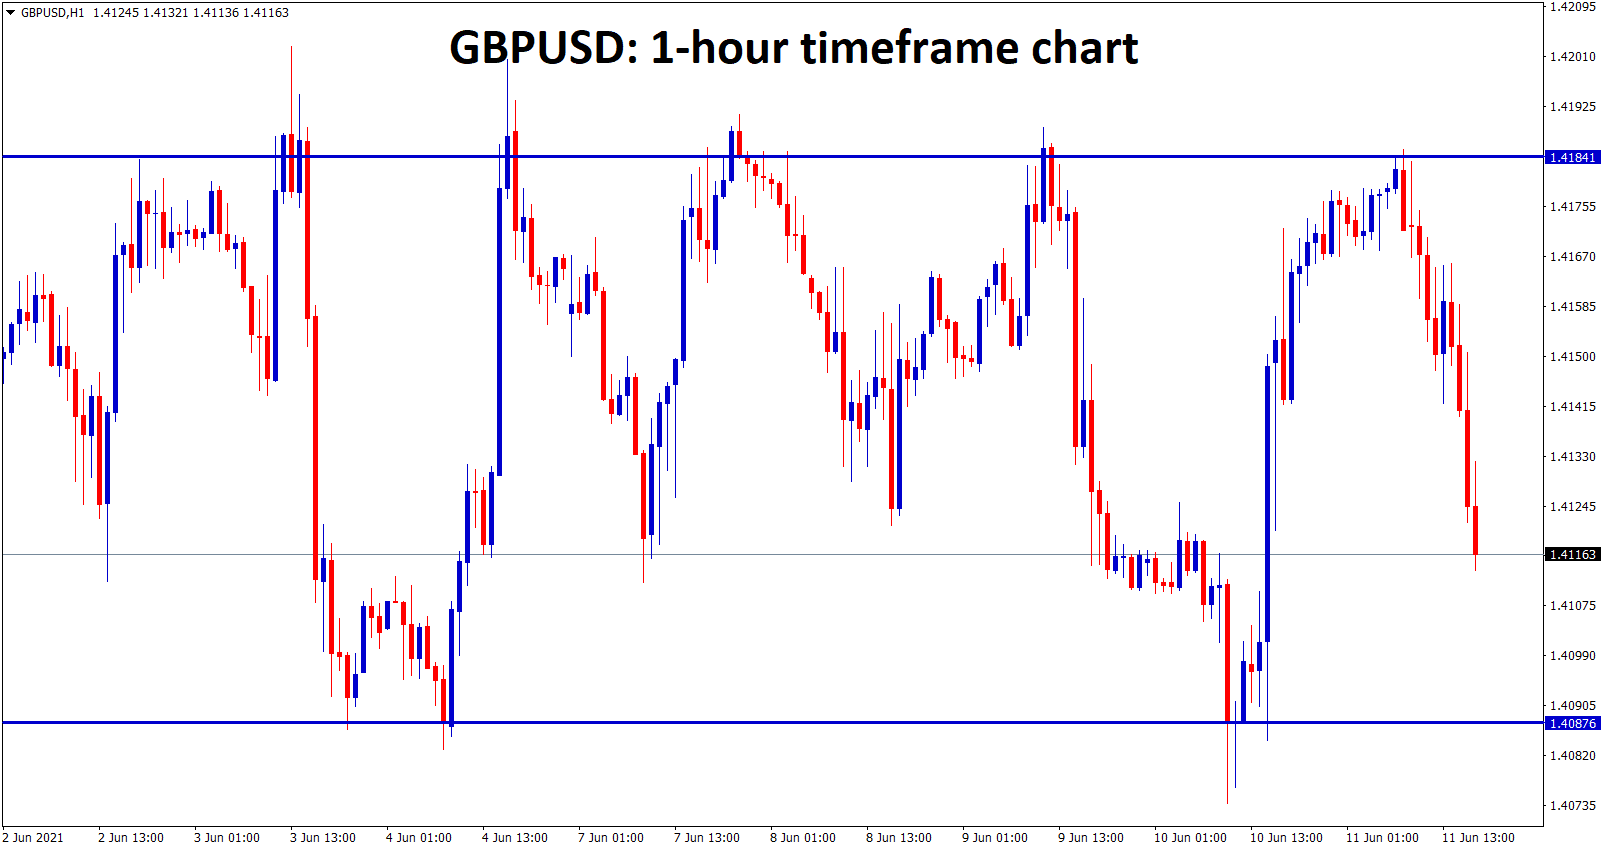 GBPUSD is moving up and down between the resistance and support level